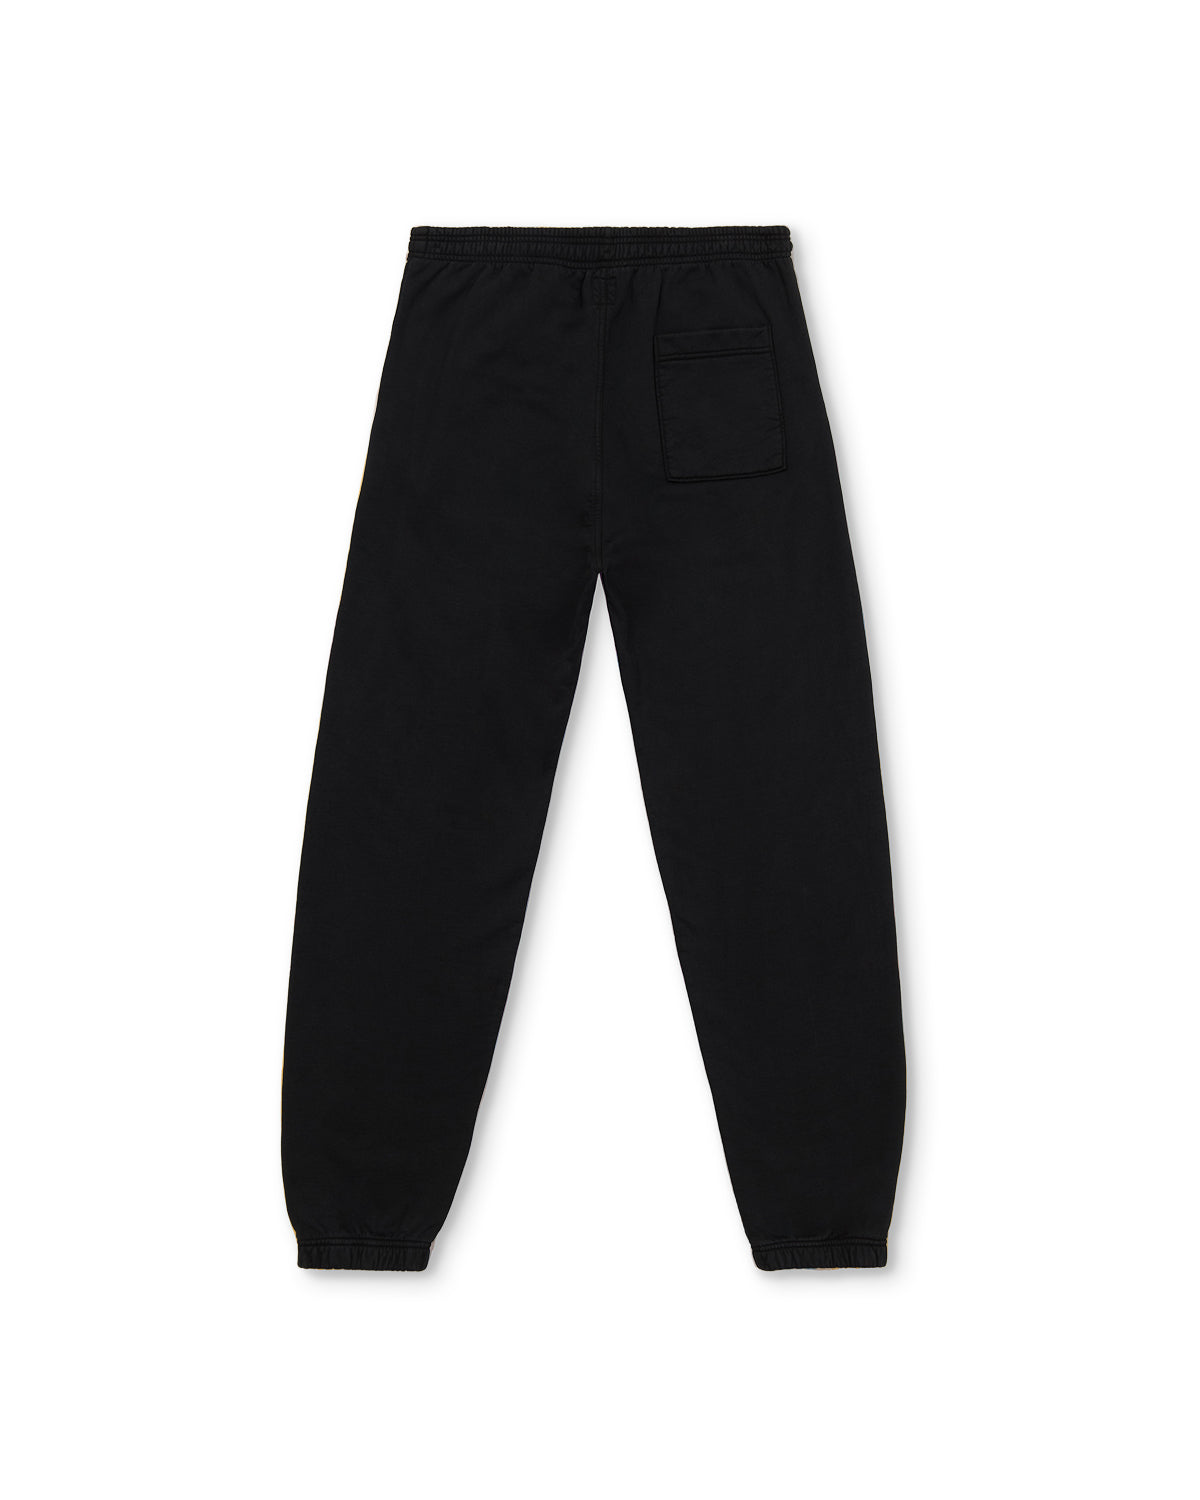 Heavyweight Embroidered Sweatpants - Black 2